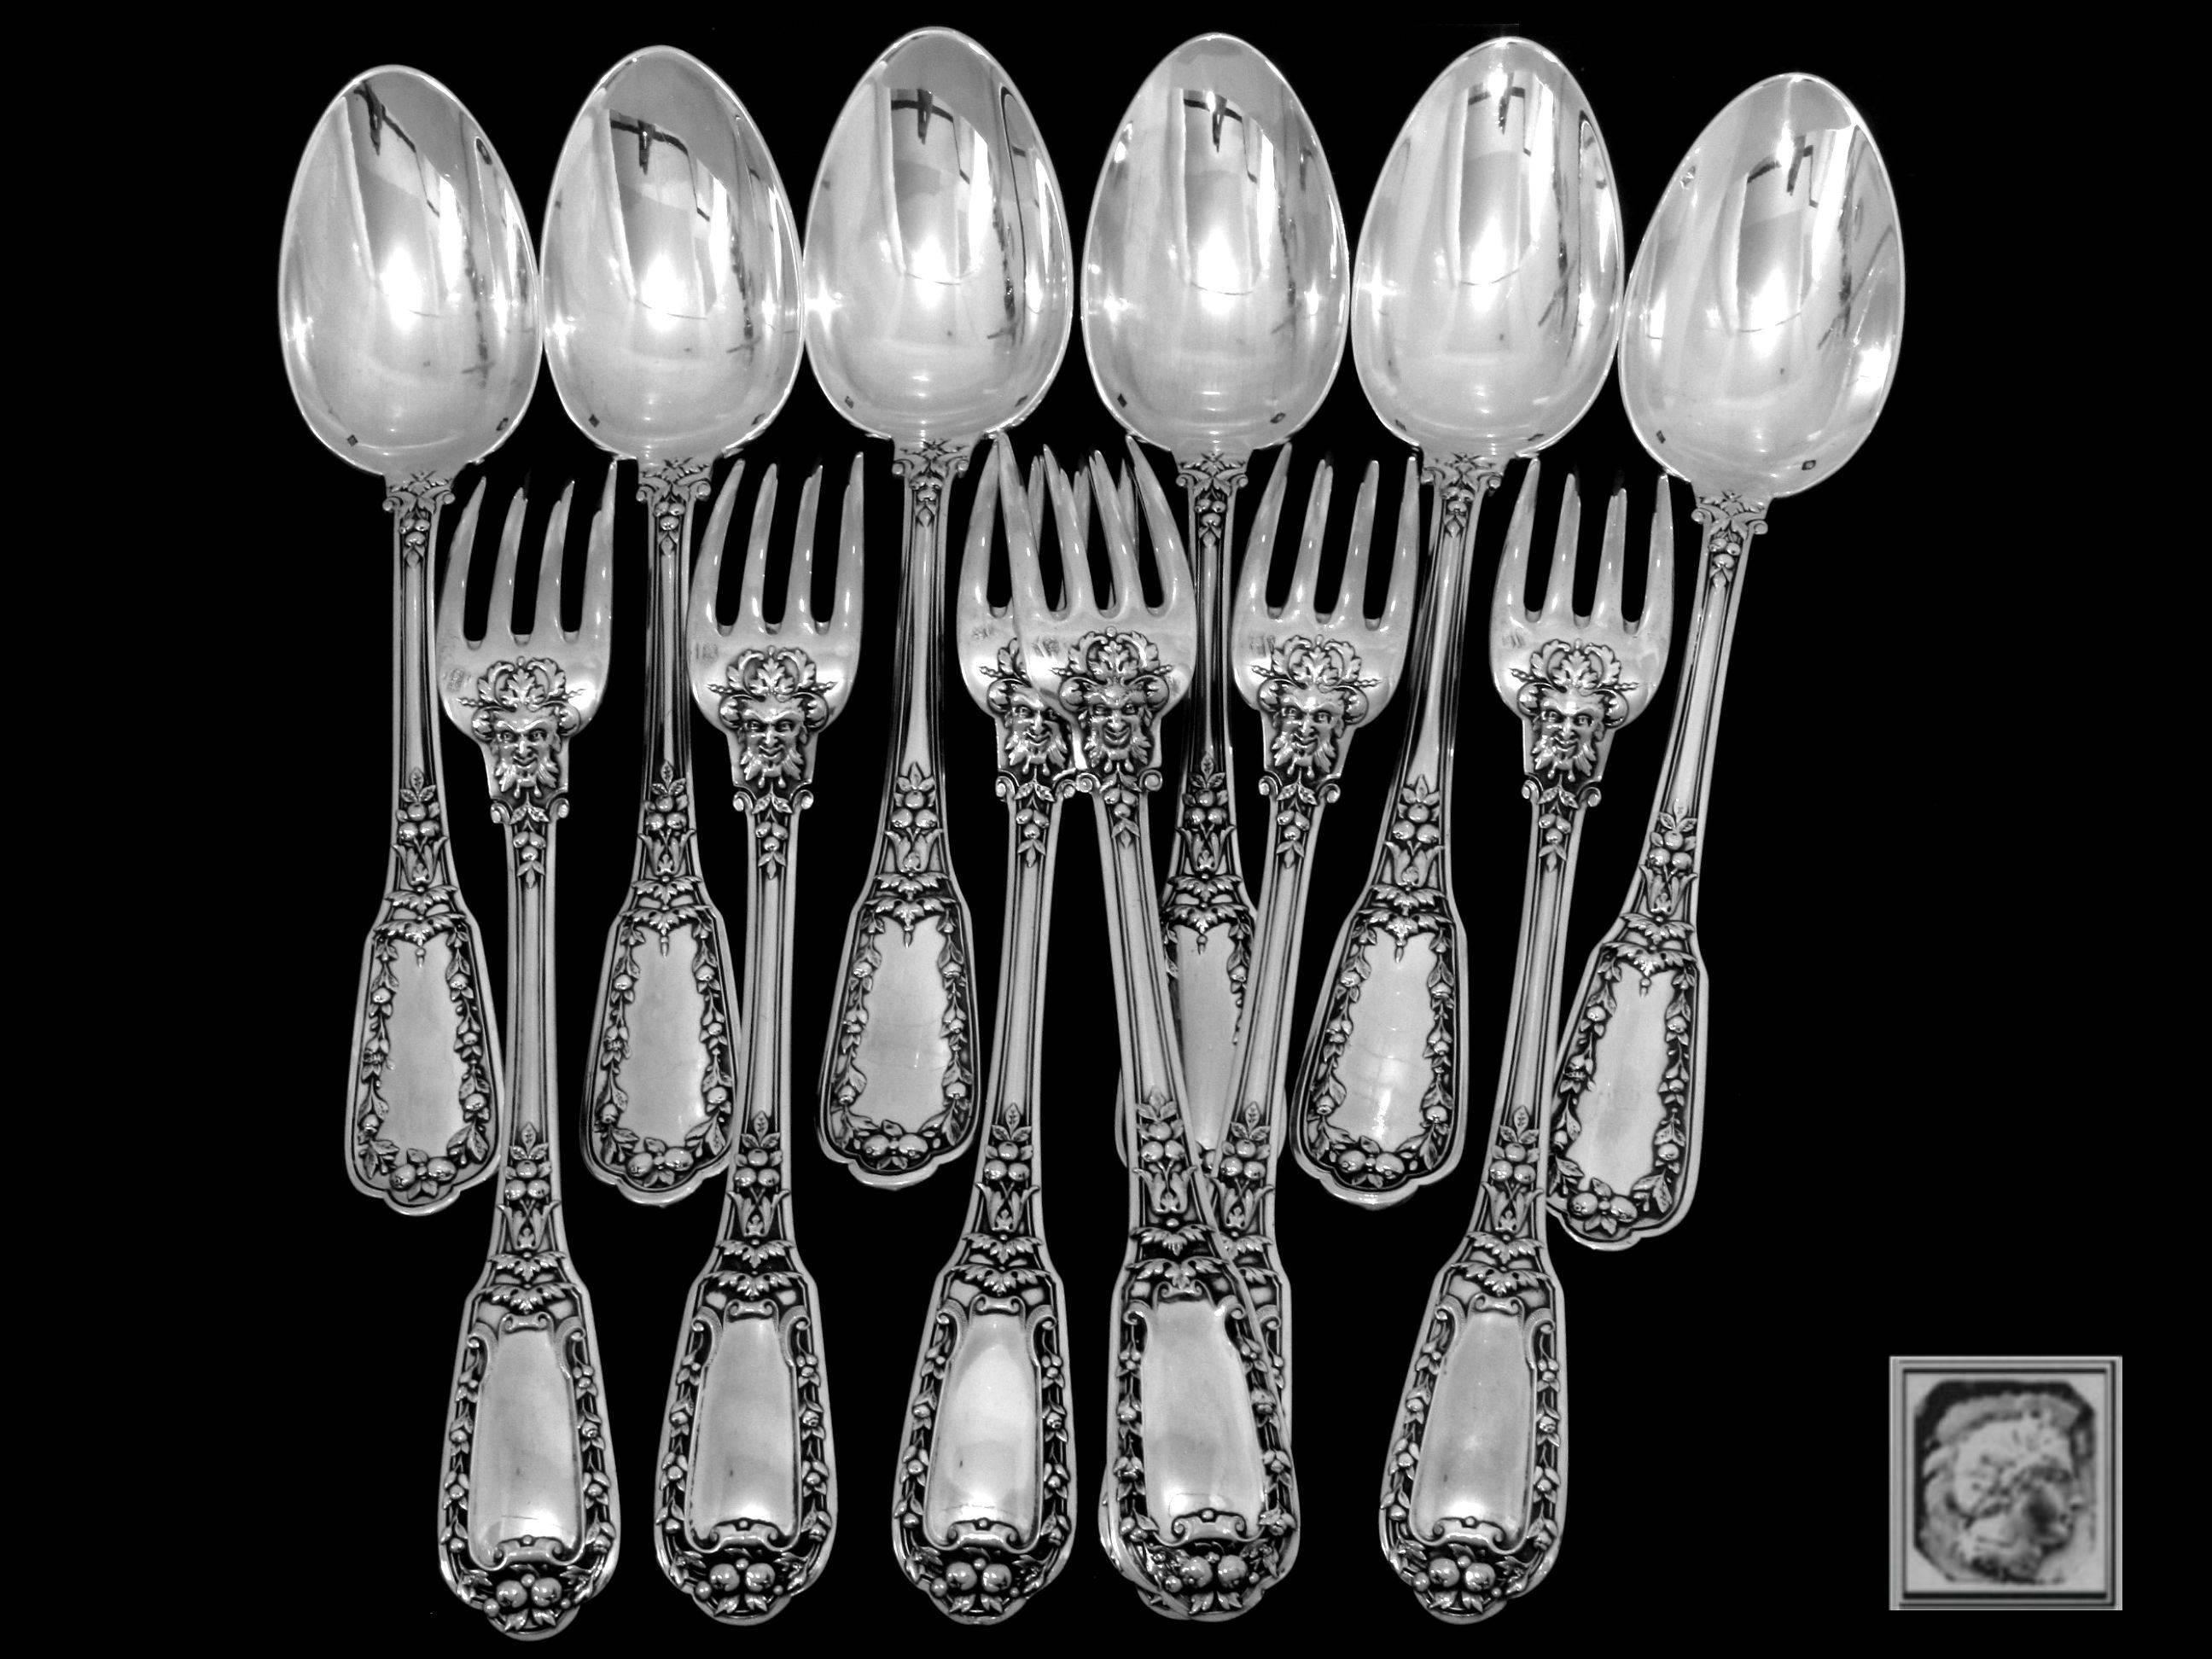 Soufflot Gorgeous French Sterling Silver Dinner Flatware Set 12 pc Mascarons In Good Condition For Sale In Triaize, Pays de Loire